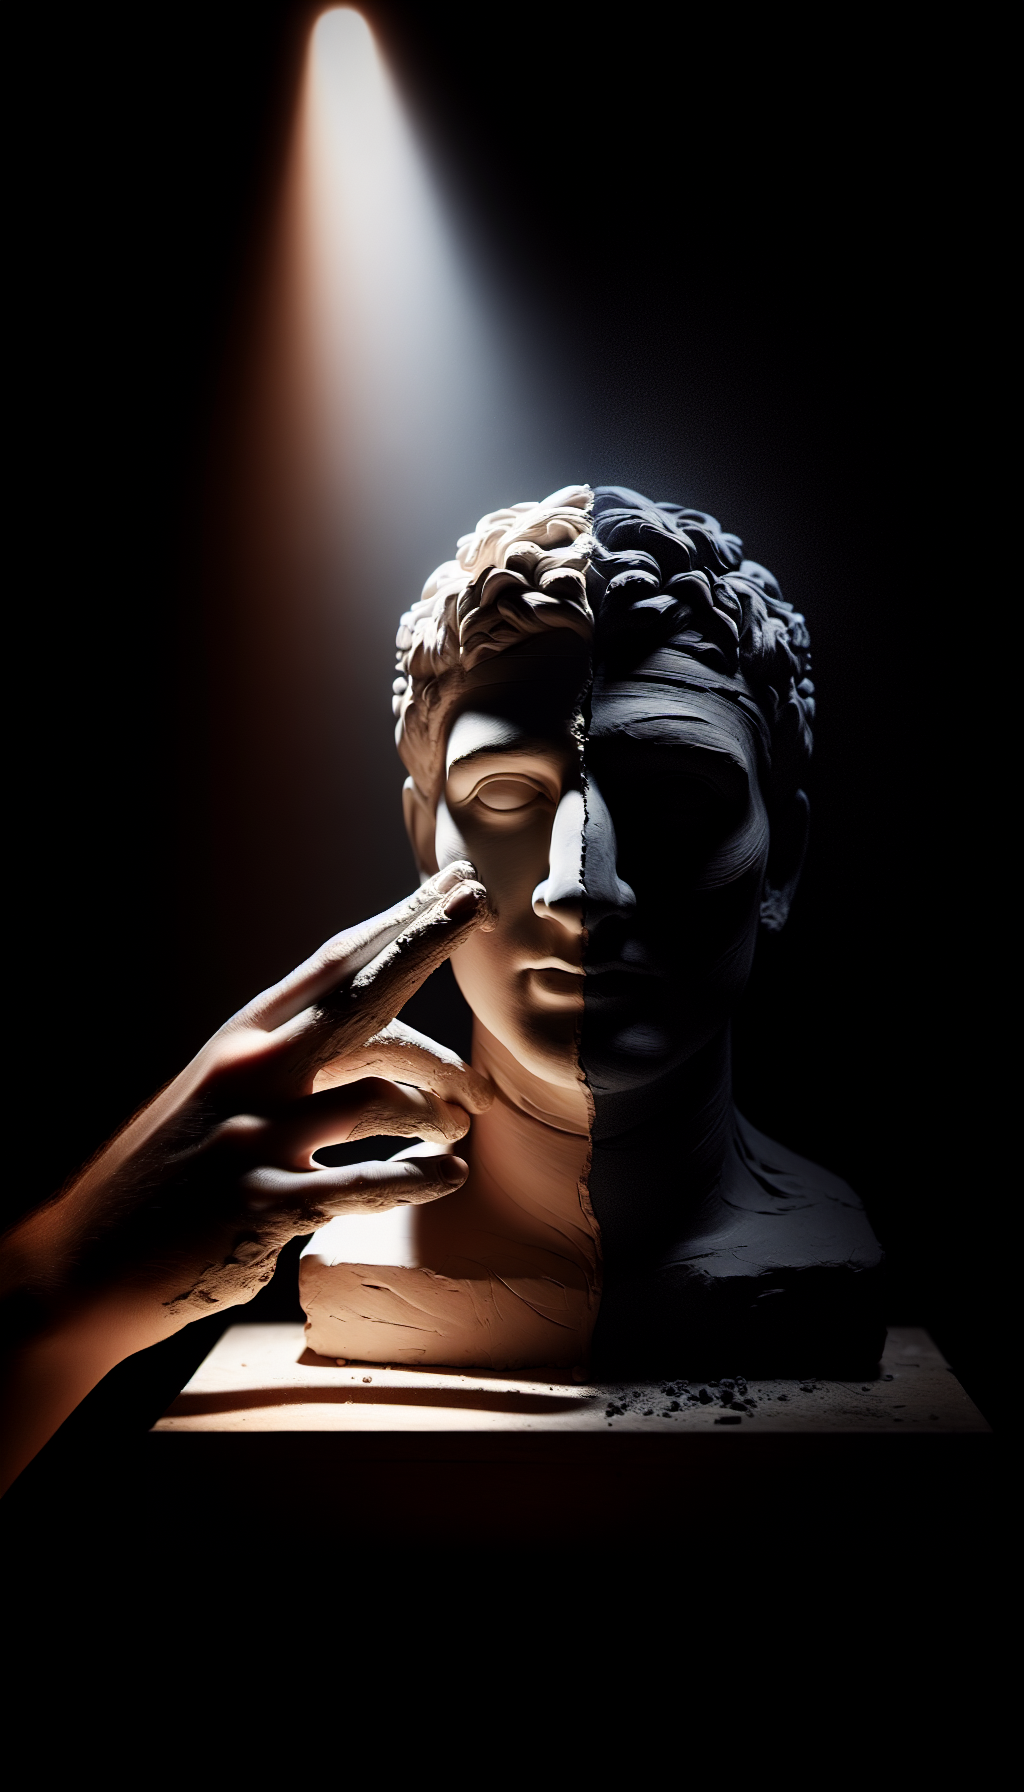 An ethereal illustration depicts an artist's hand, half-bathed in dramatic light, half-shrouded in shadow, as it sculpts a clay bust. The sculpture transitions from a detailed, high-contrast form in the light to a smooth, undefined silhouette in the darkness, exemplifying the art element of value. This gradation of light to dark symbolizes the nuanced interplay of value in creating depth and dimension.